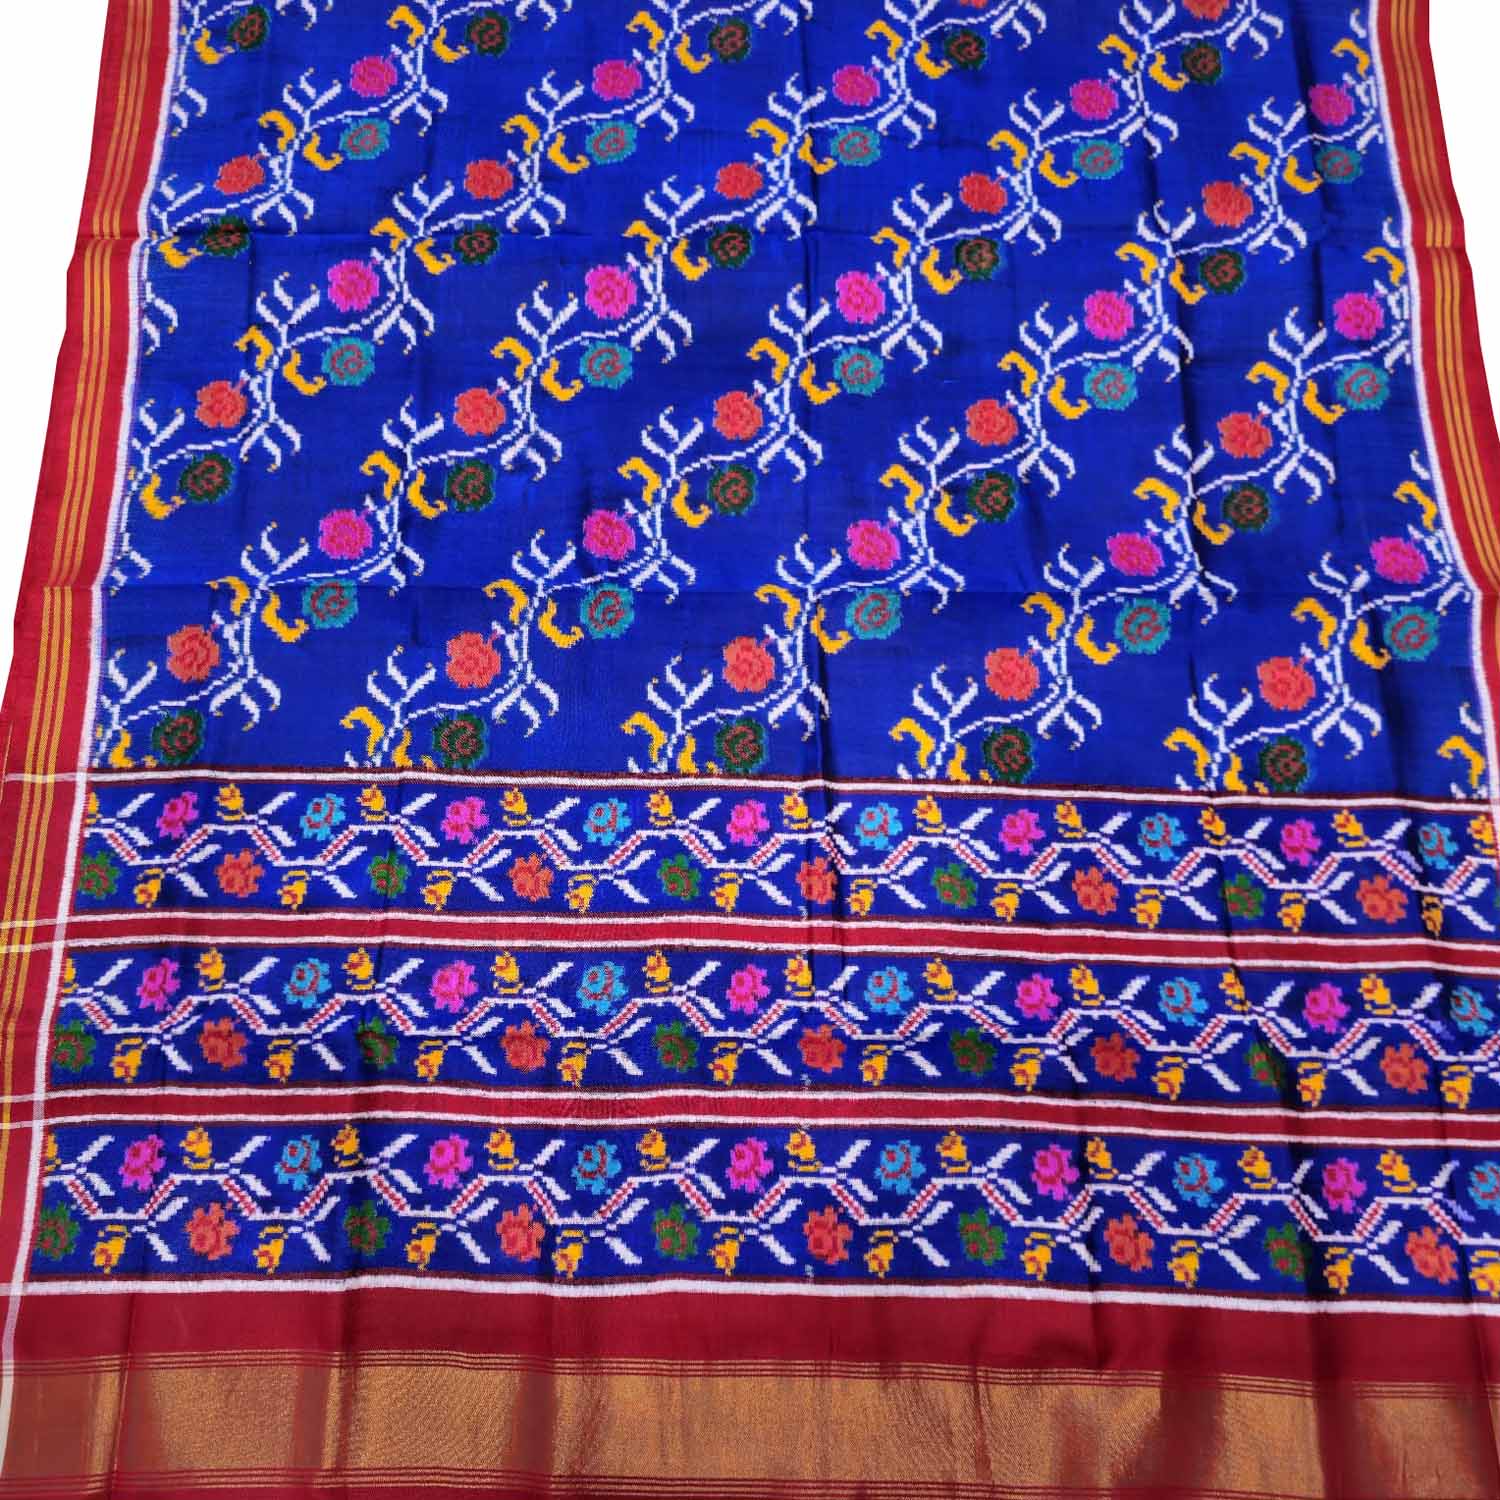 Festive Wear Double Ikkat Patan Patola Saree, Dry Clean at Rs 60000 in  Wadhwan